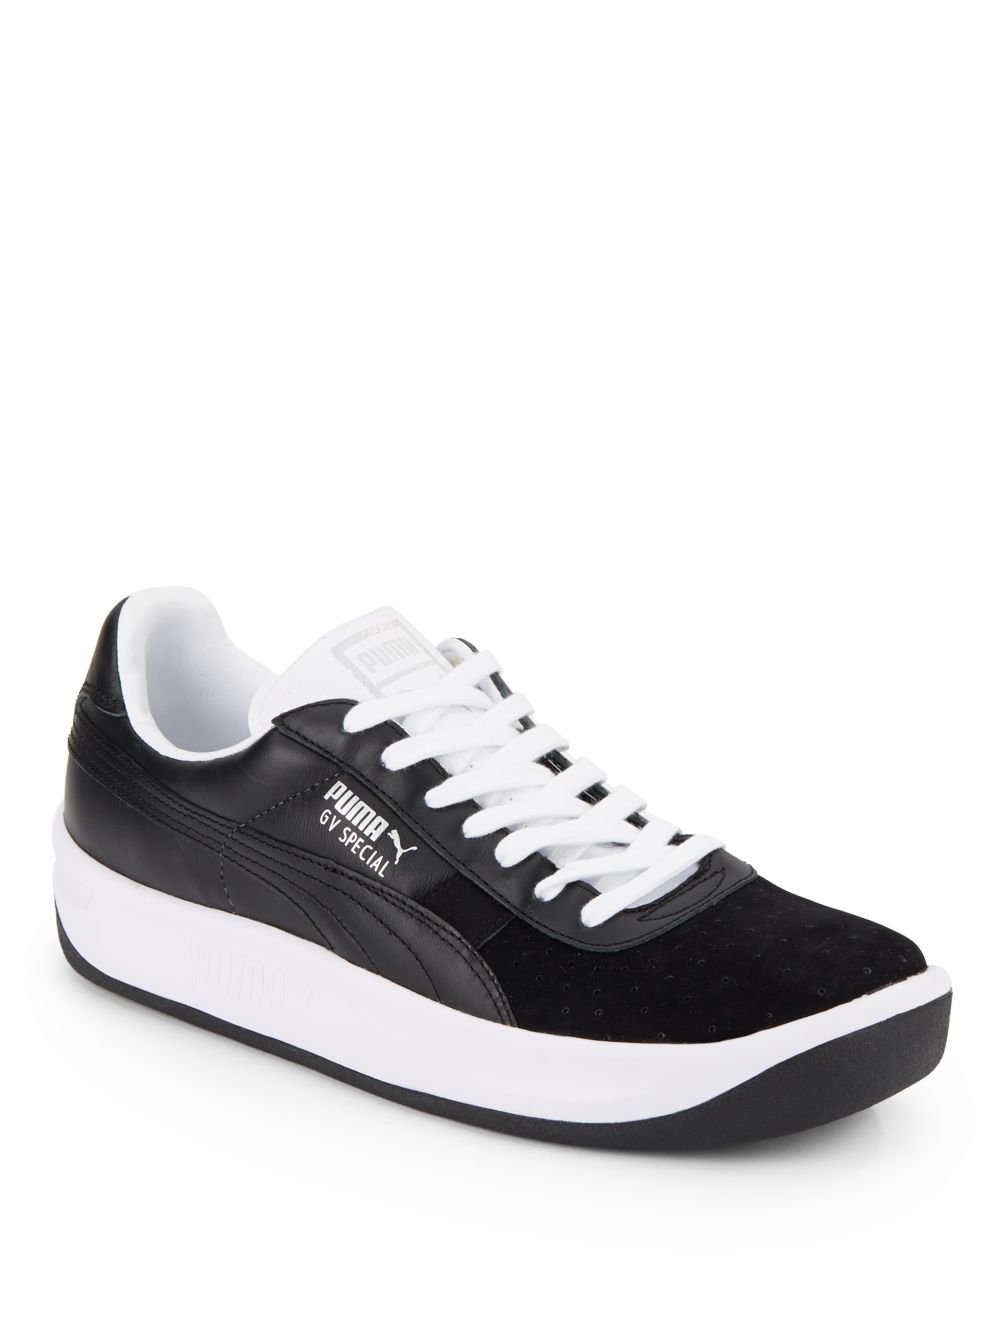 PUMA Gv Special Leather & Suede Sneakers in Black for Men | Lyst